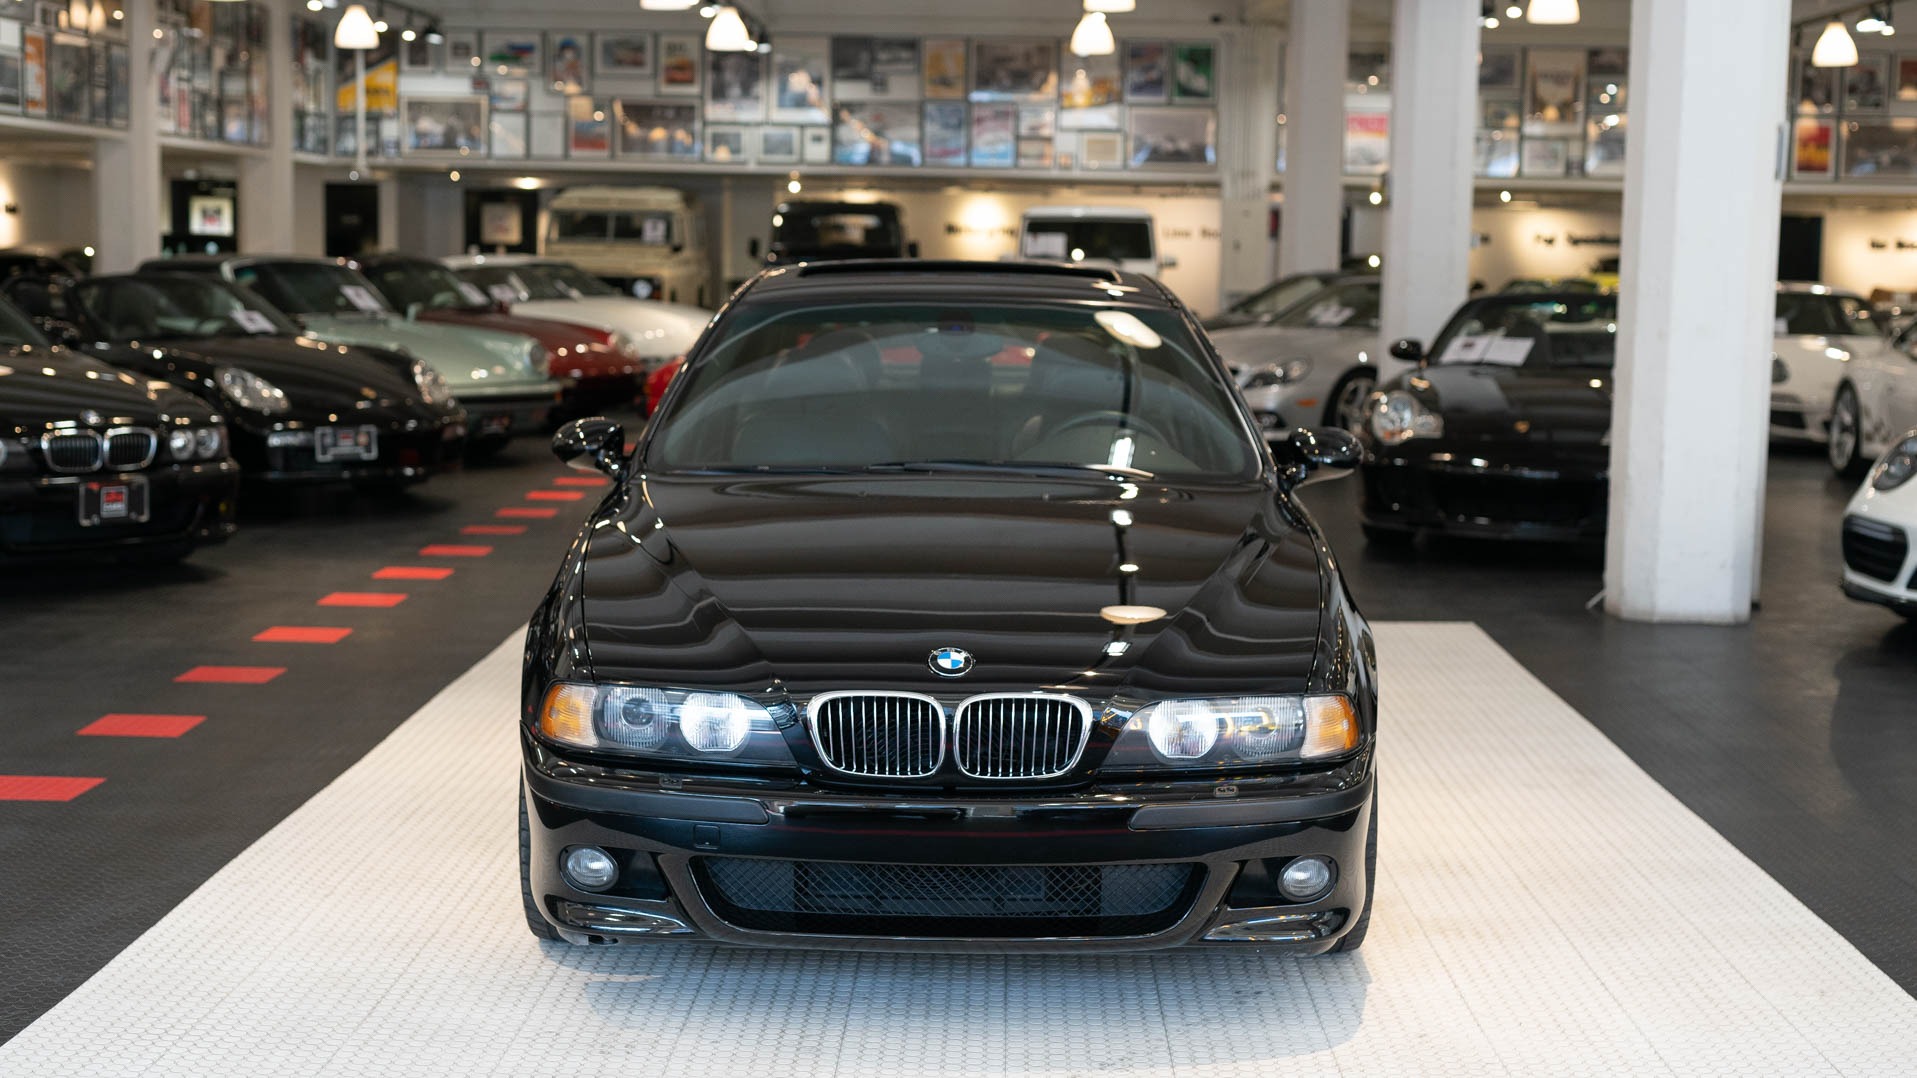 Used 2000 BMW M5 For Sale ($44,900)